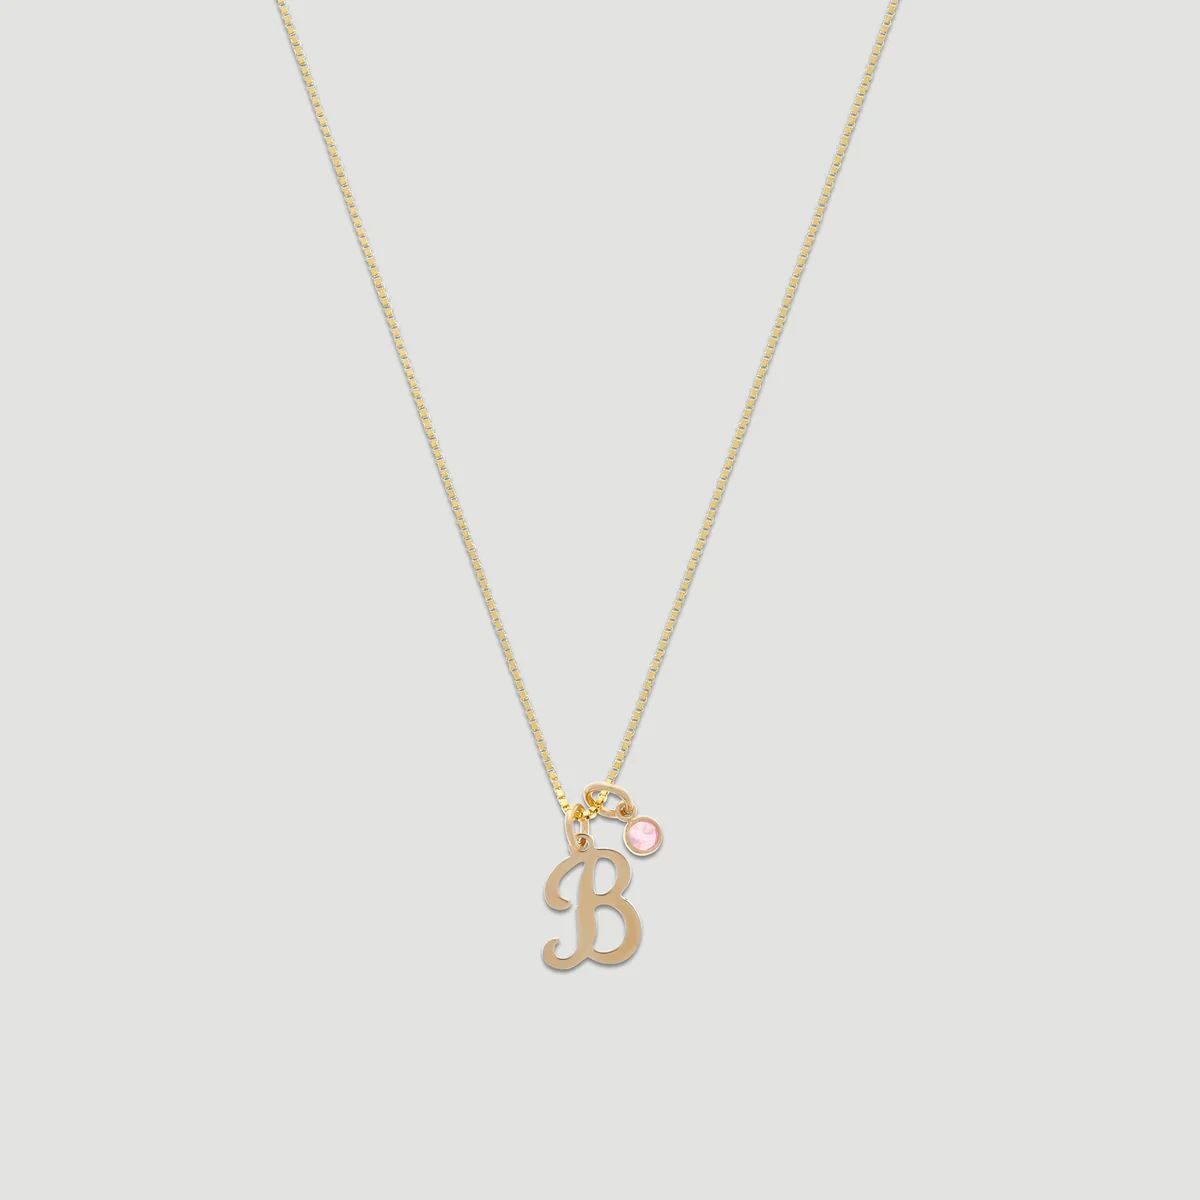 14k vintage script initial necklace | Cuffed by Nano